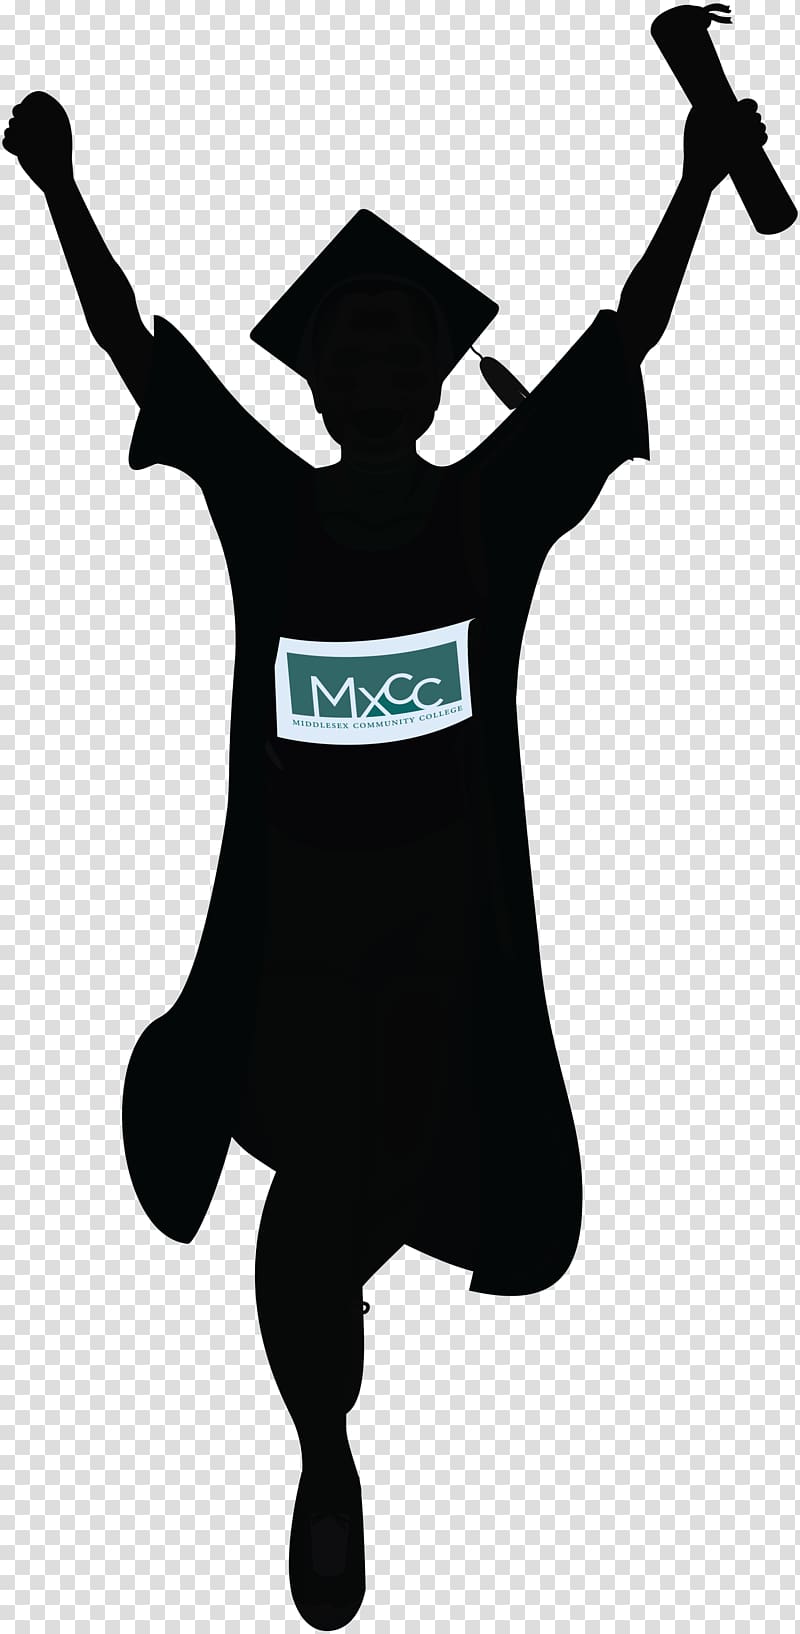 Middlesex Community College Cap and Gown 5K Evening gown Dress, gown transparent background PNG clipart